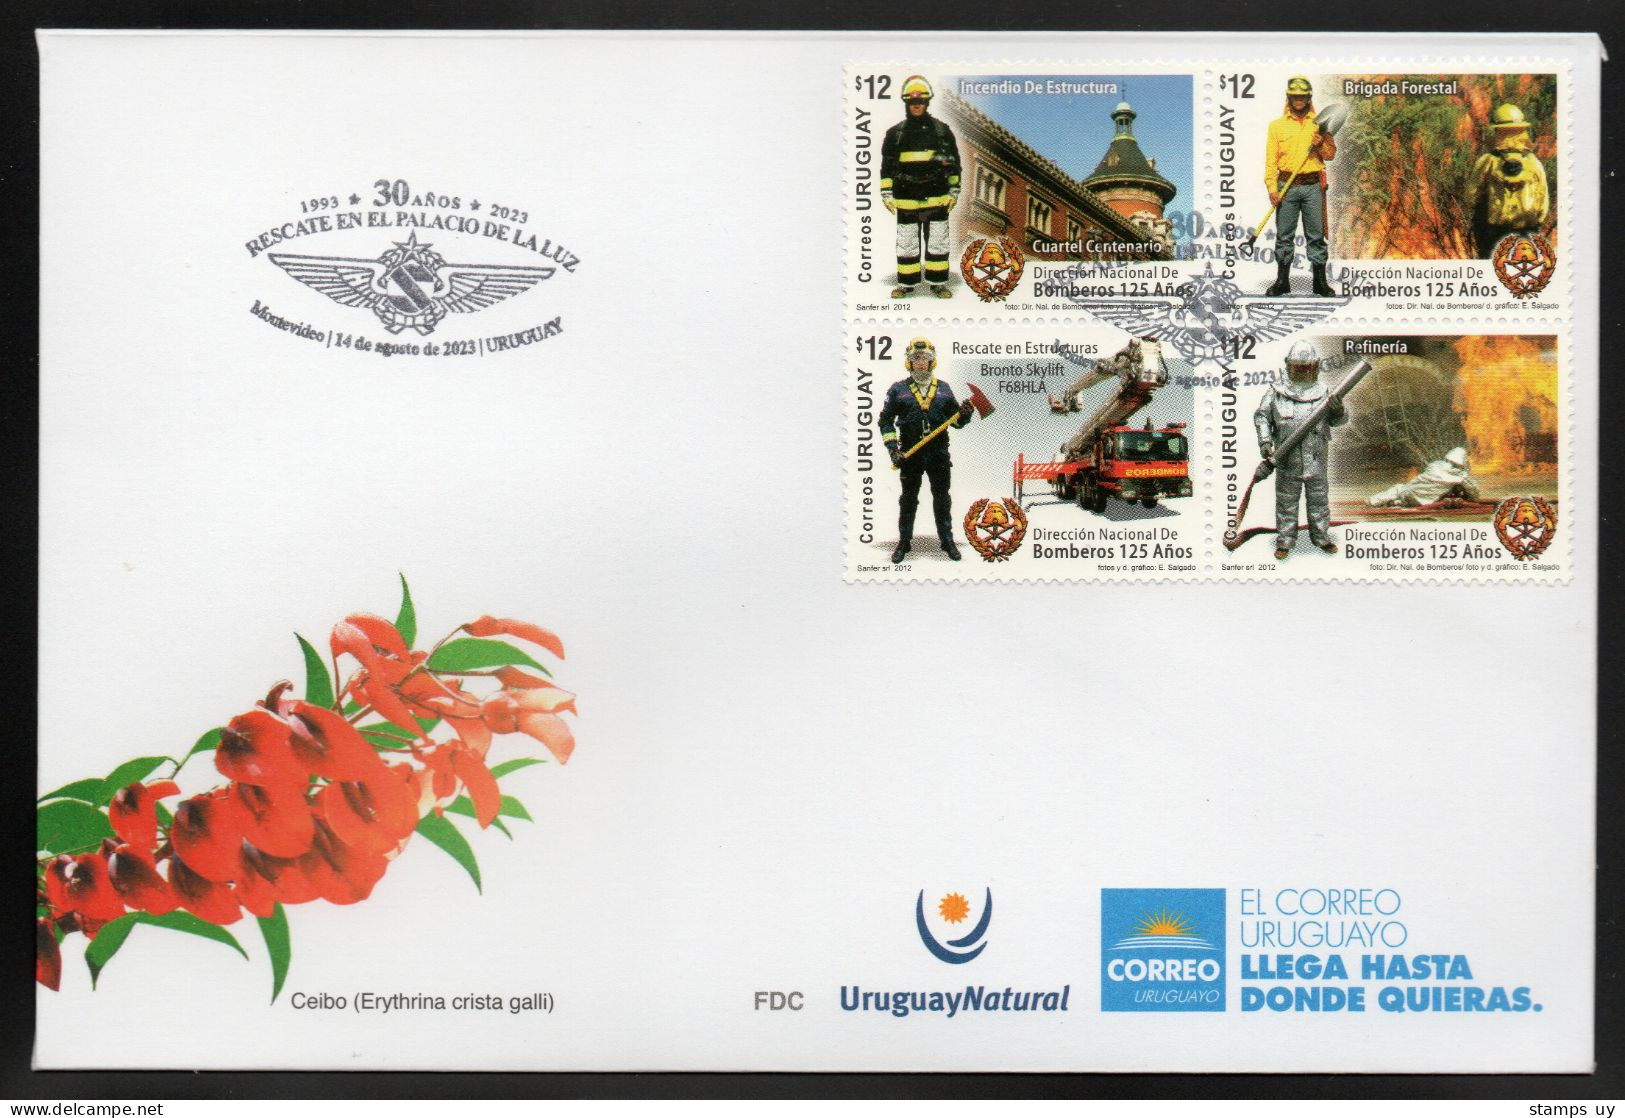 URUGUAY 2023 (Fireman, Air Force, Truck, Crane, Bronto Skylift, Refinery, Protection Suit) – Cover With Special Postmark - Chimie